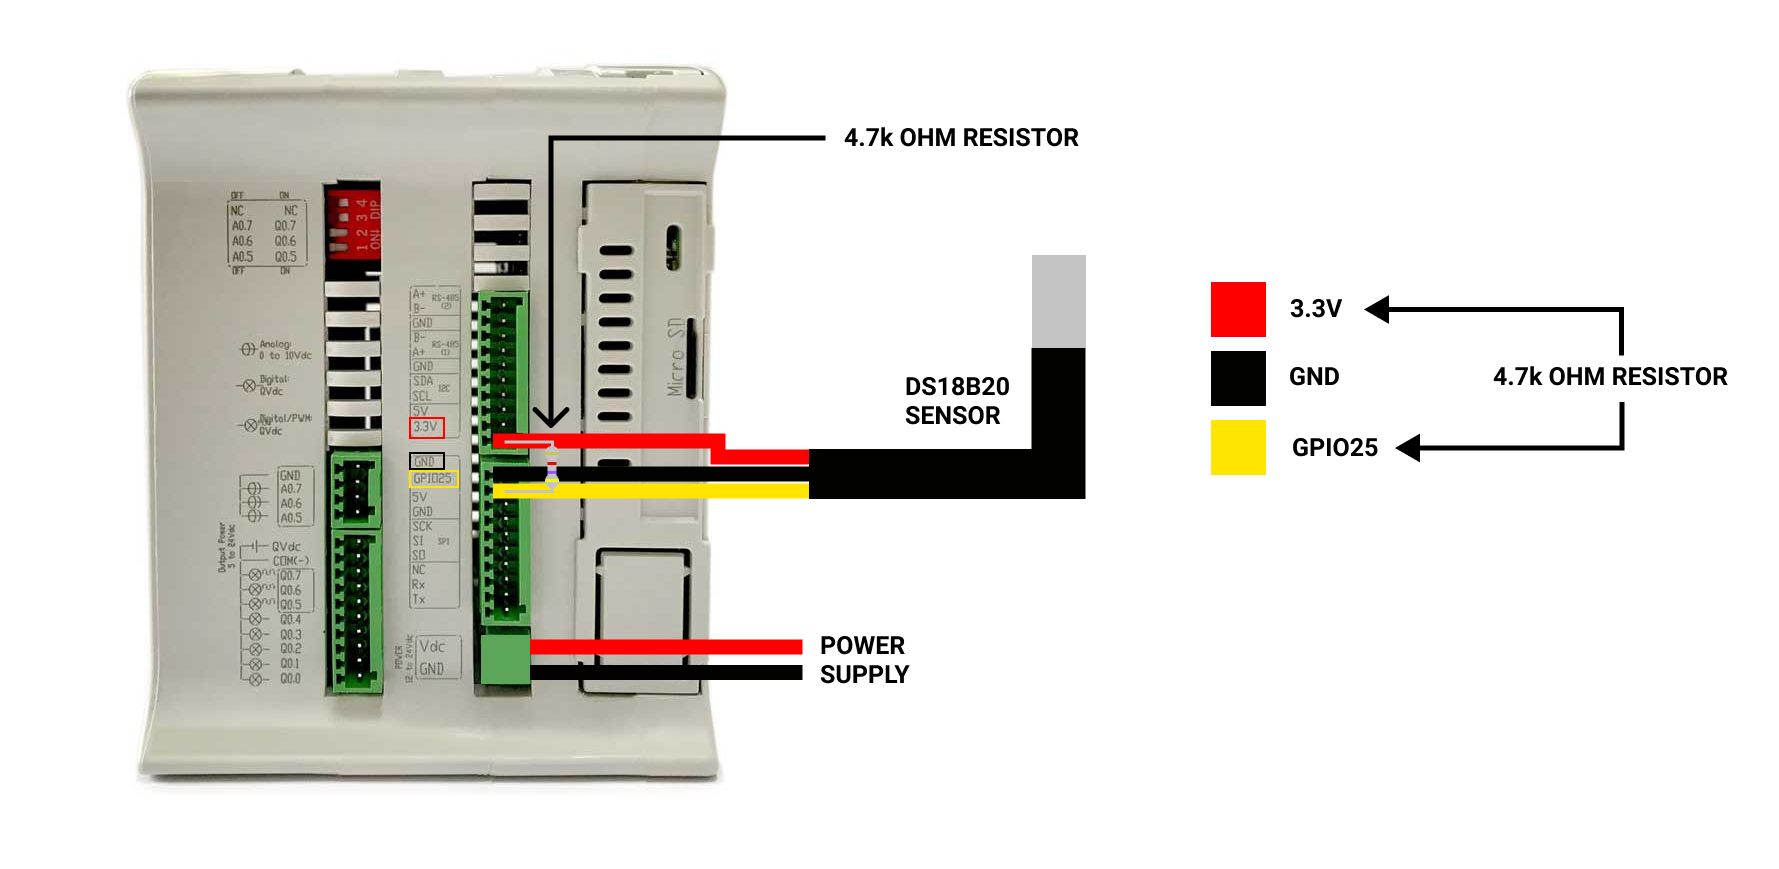 Connection Raspberry PLC and GPIO - I. Temperature sensor & Raspberry PLC: How to connect them